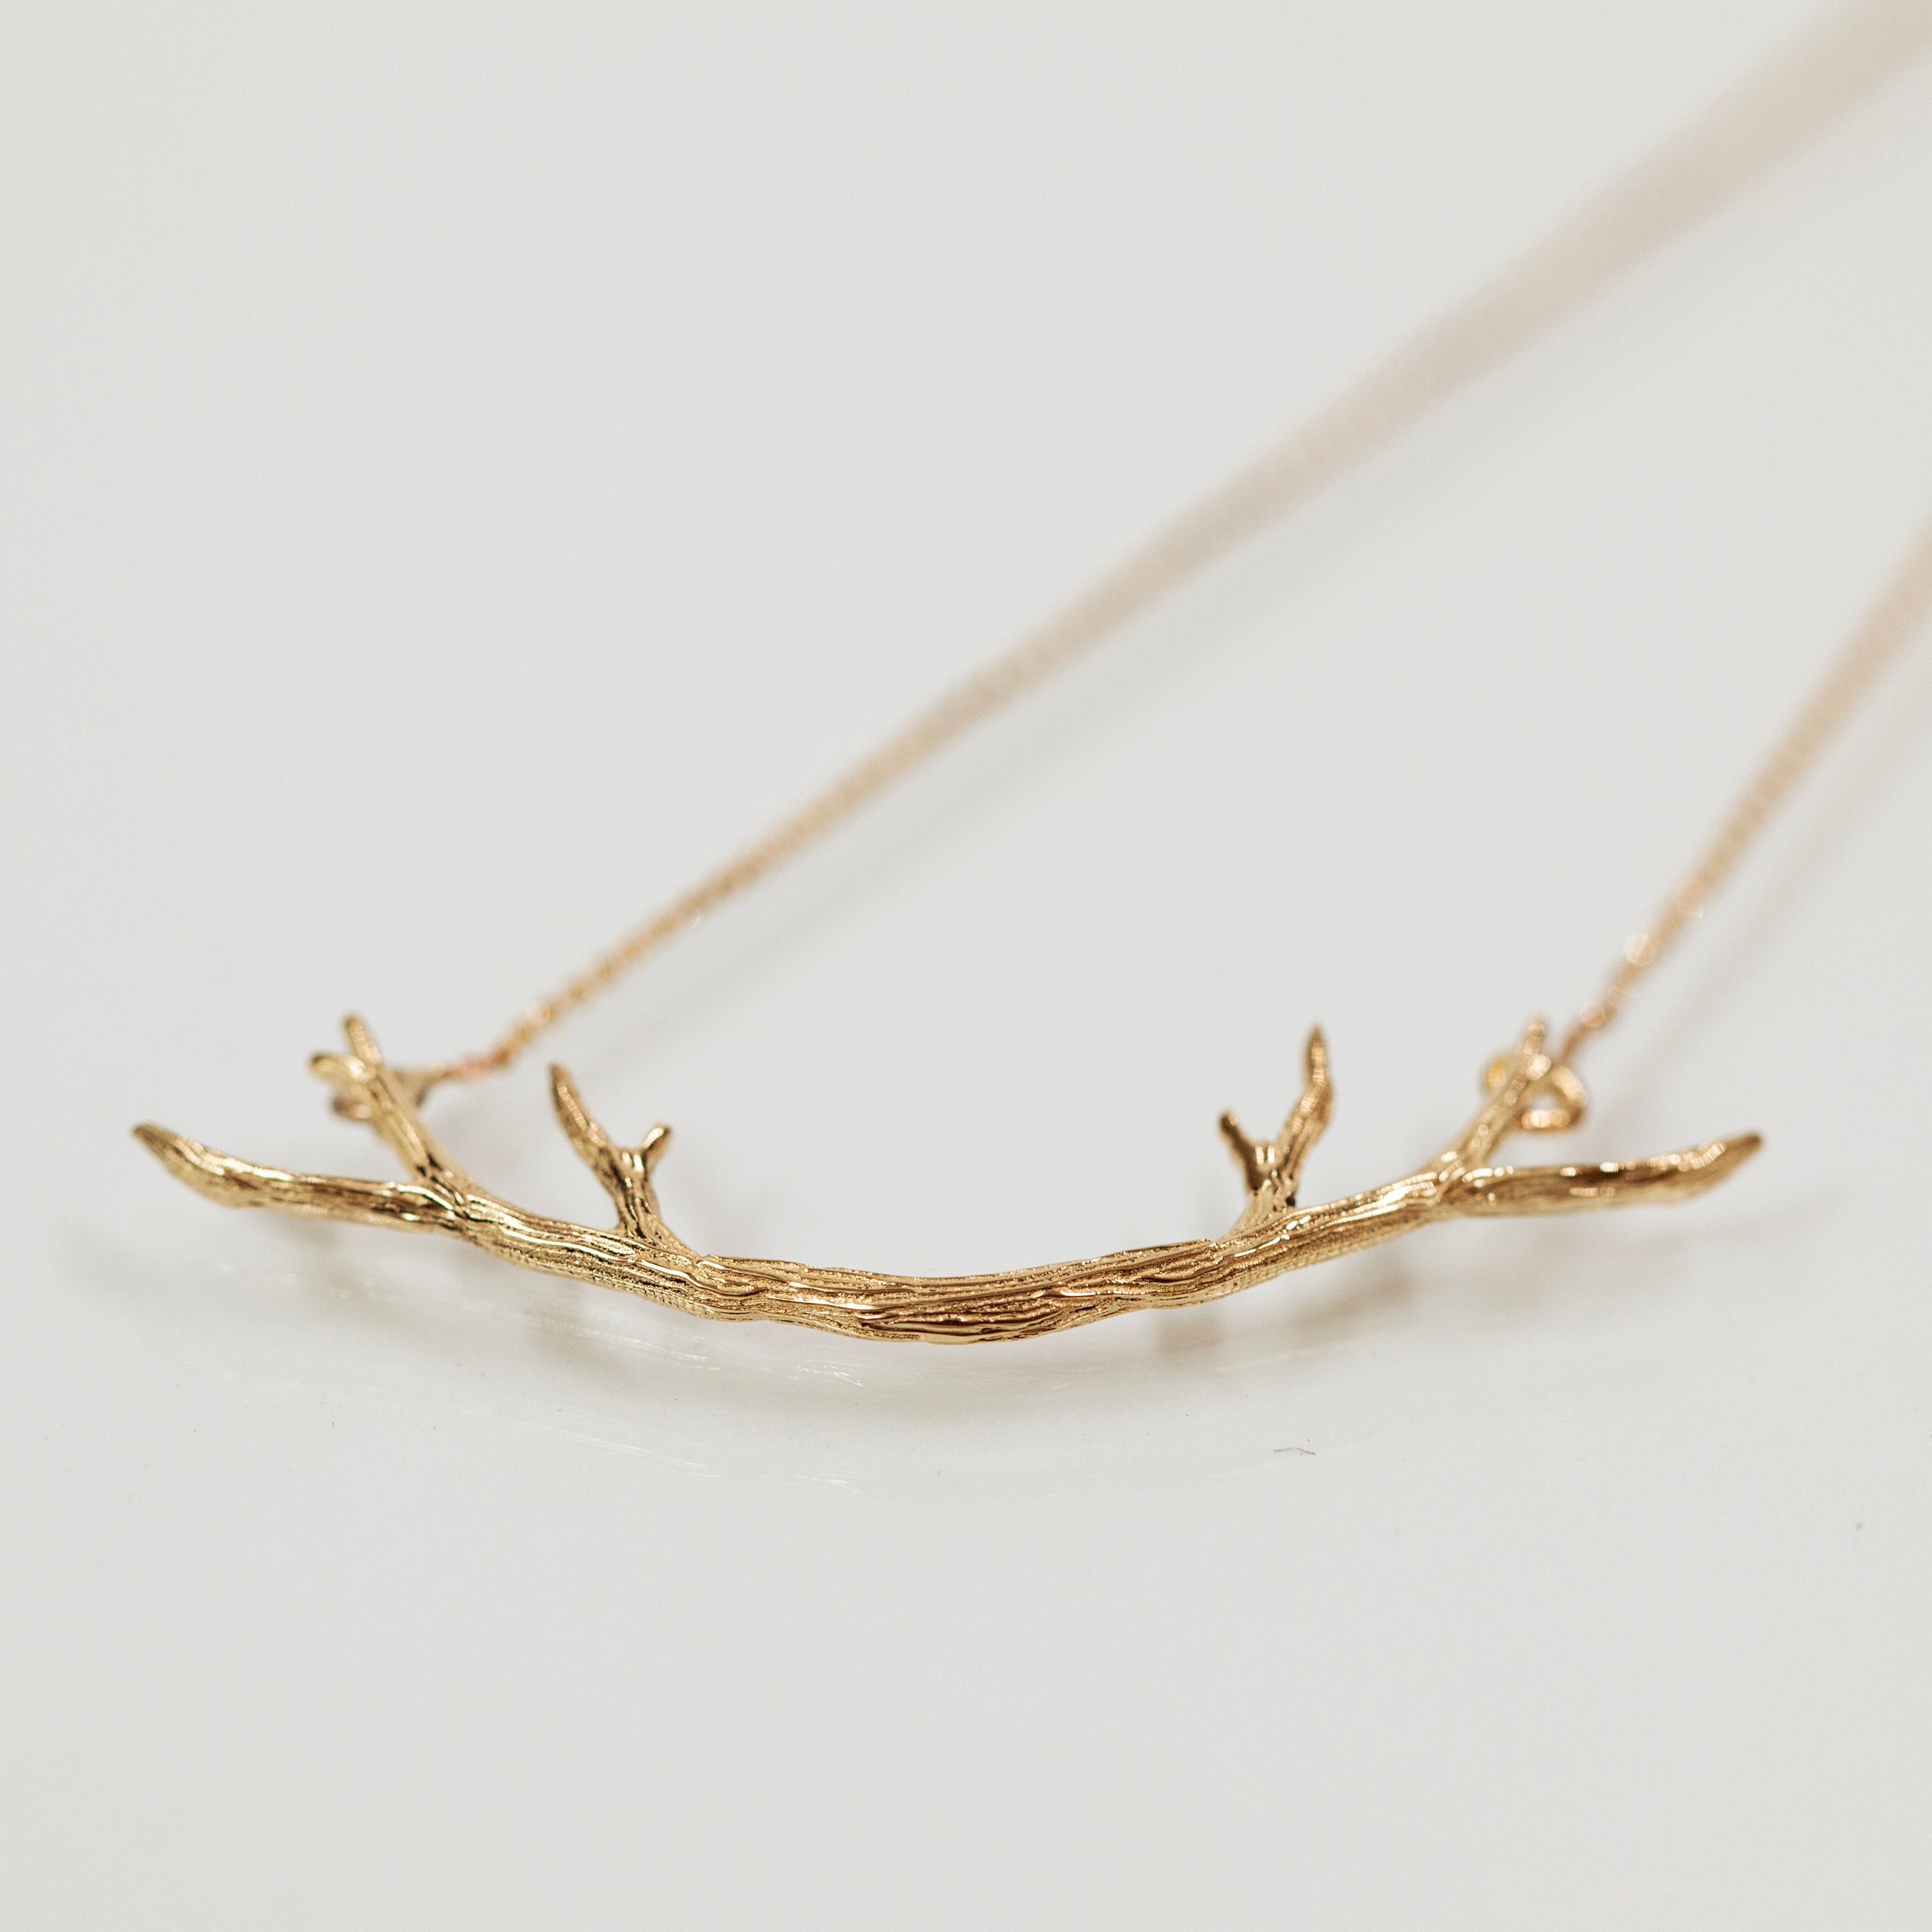 Horns Branch necklace